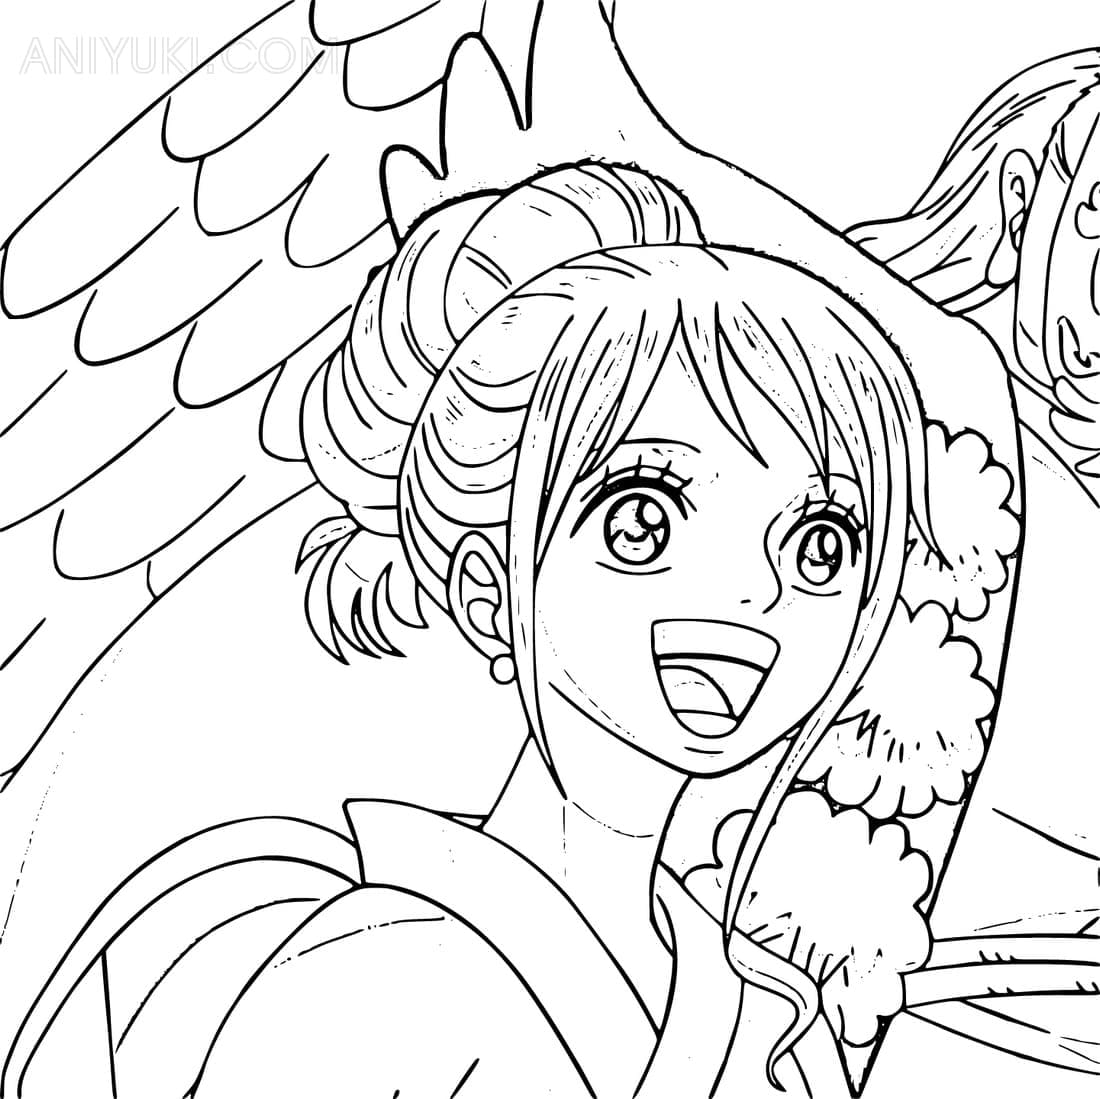 One Piece Coloring Pages - AniYuki - Anime Portal